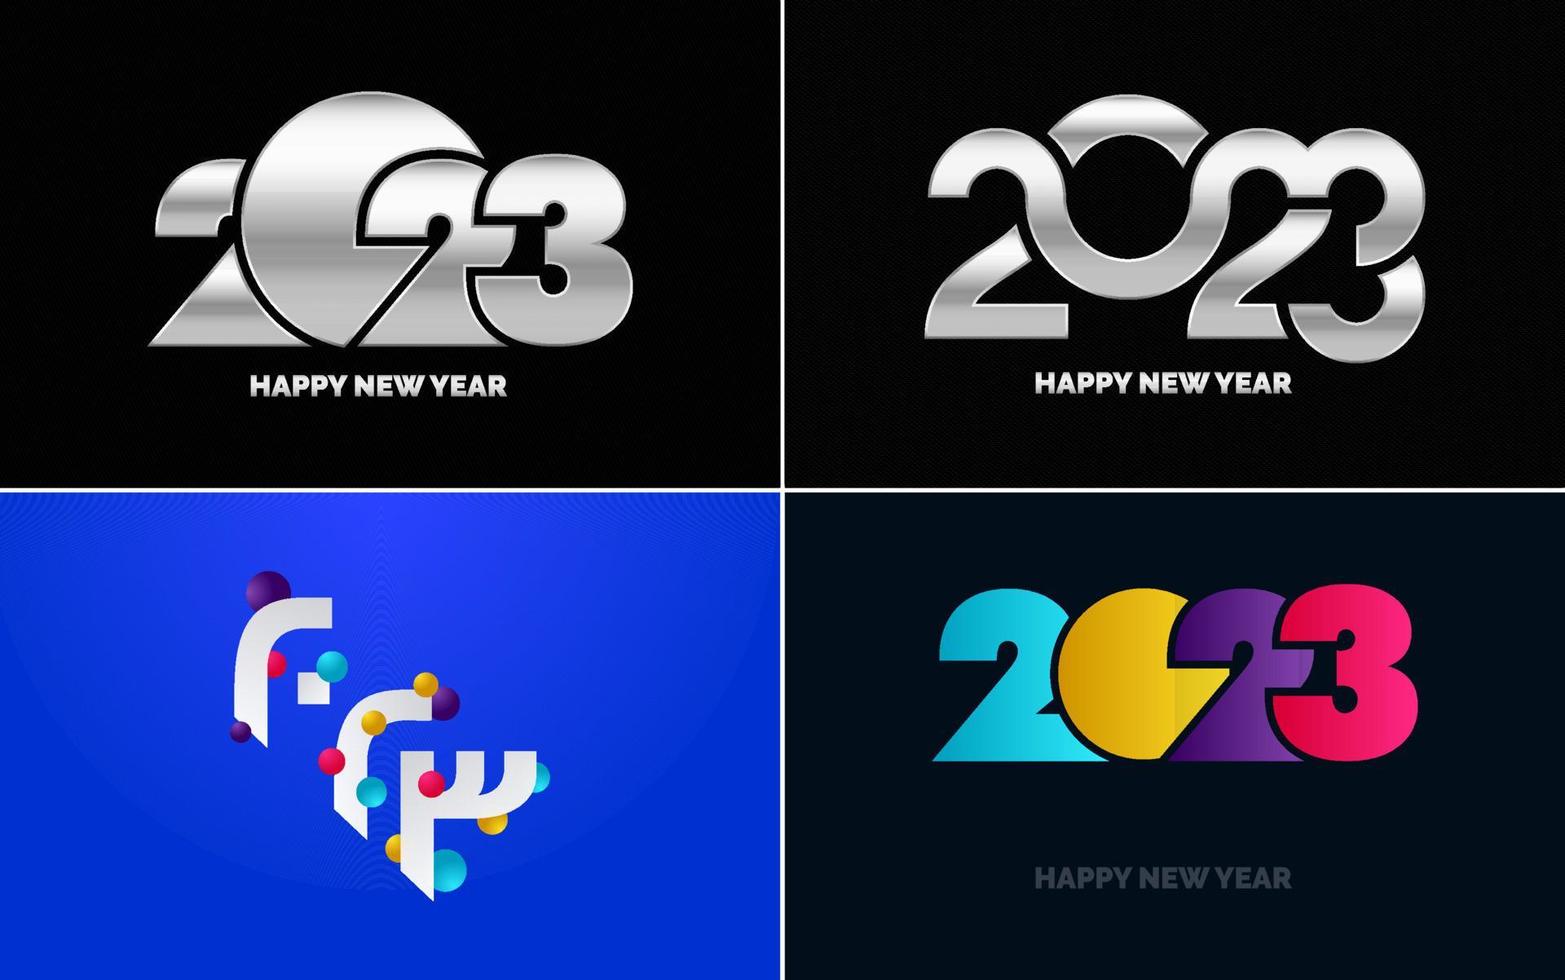 Big set 2023 Happy New Year black logo text design. 20 23 number design template. Collection of symbols of 2023 Happy New Year vector